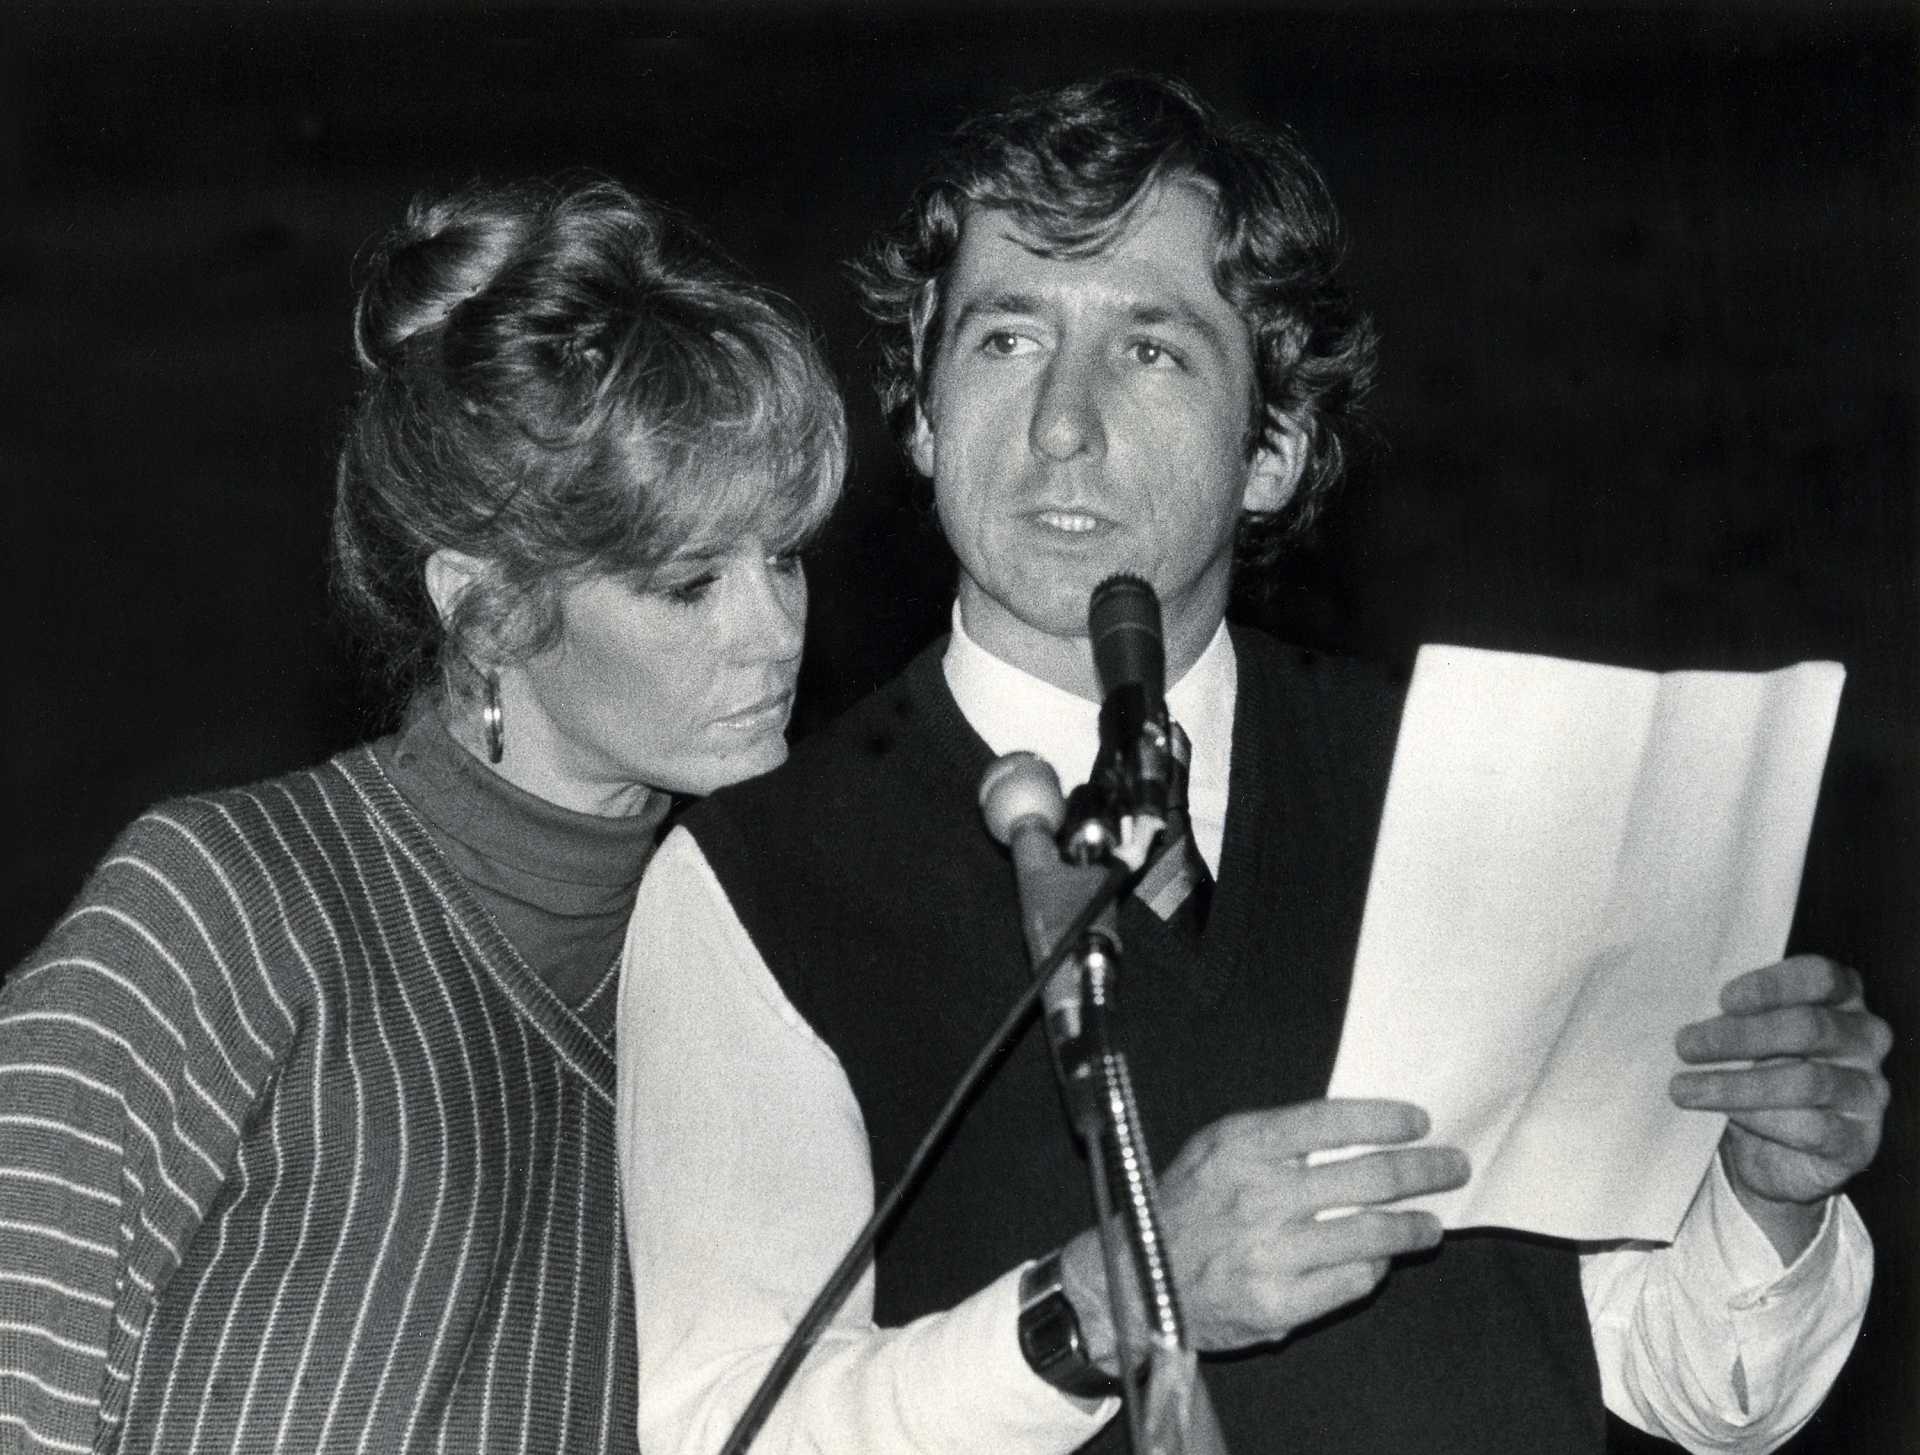 Actress Jane Fonda at a press conference with political activist Tom Hayden, her second husband. 1979